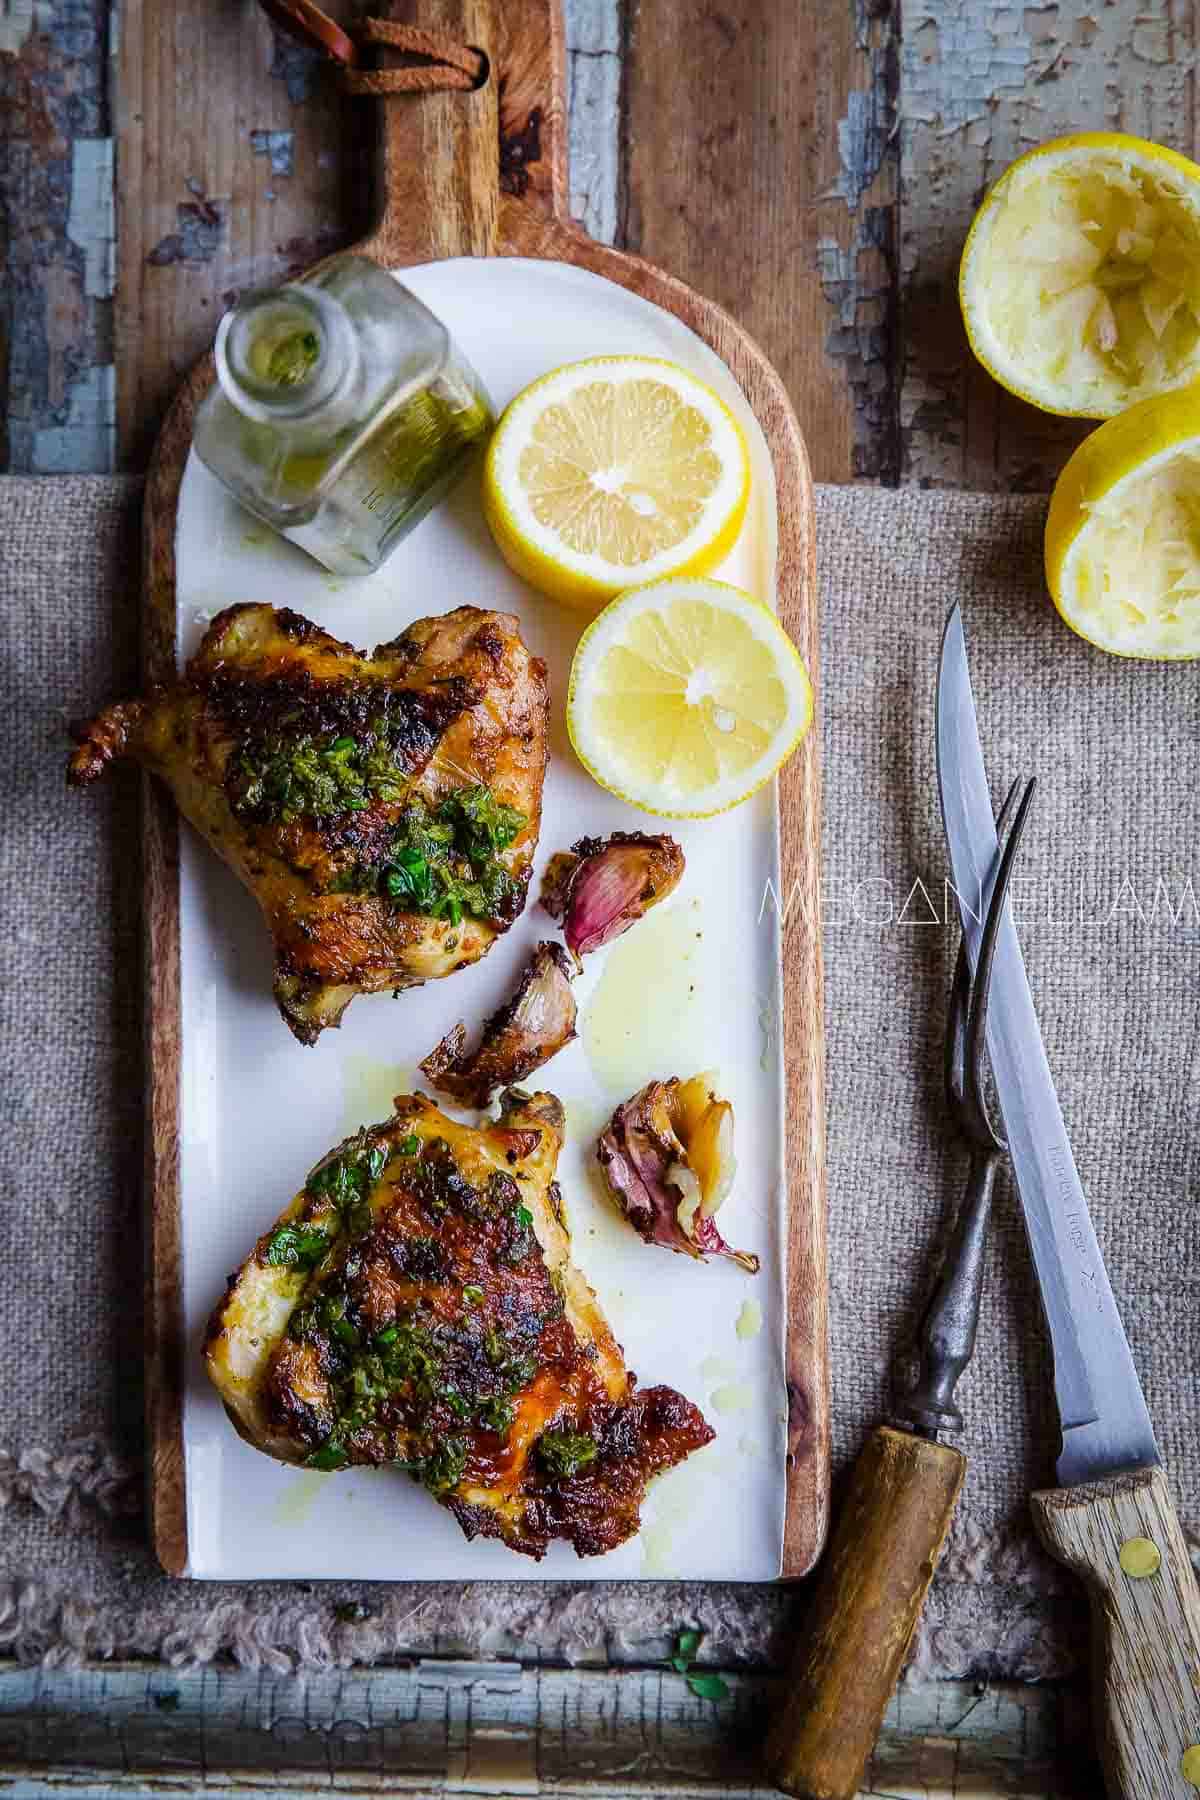 Grilled chicken coated with salmoriglio with lemons to the side.